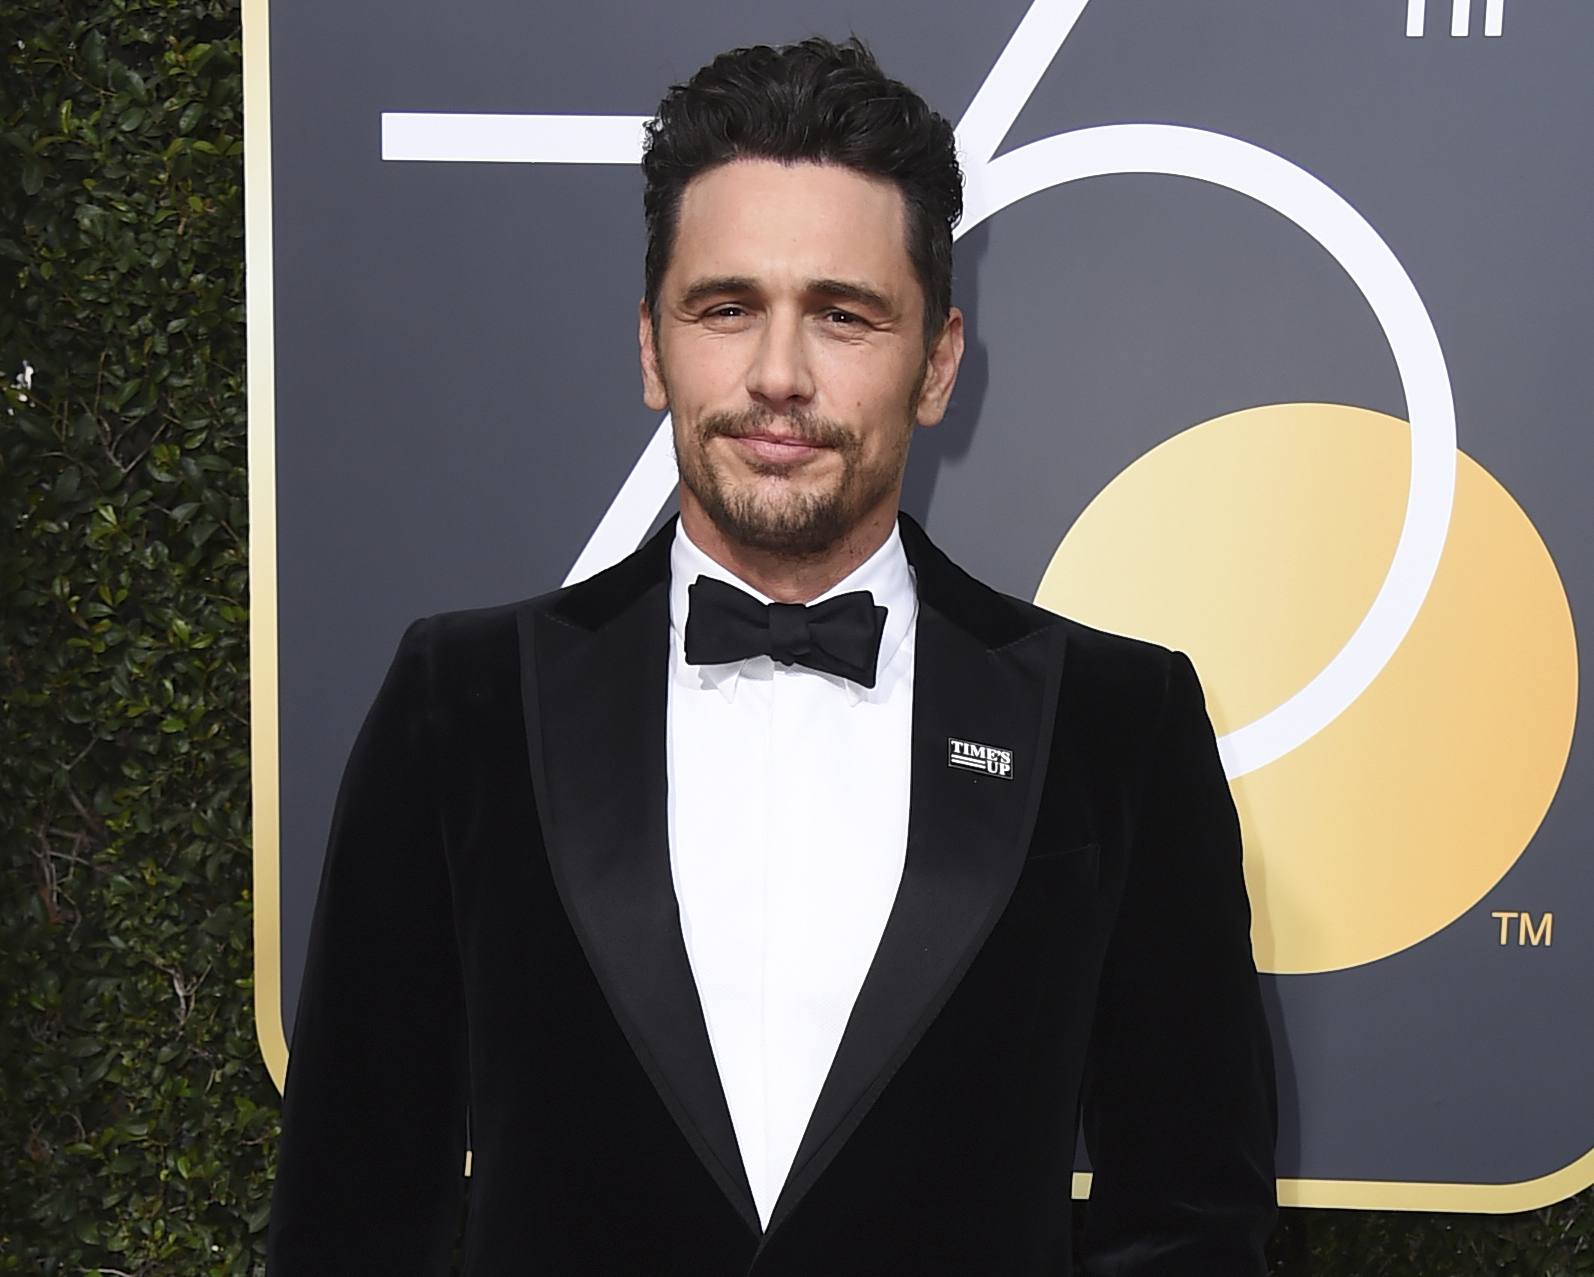 PHOTO: James Franco arrives at the 75th annual Golden Globe Awards in Beverly Hills, Calif., Jan. 7, 2018.